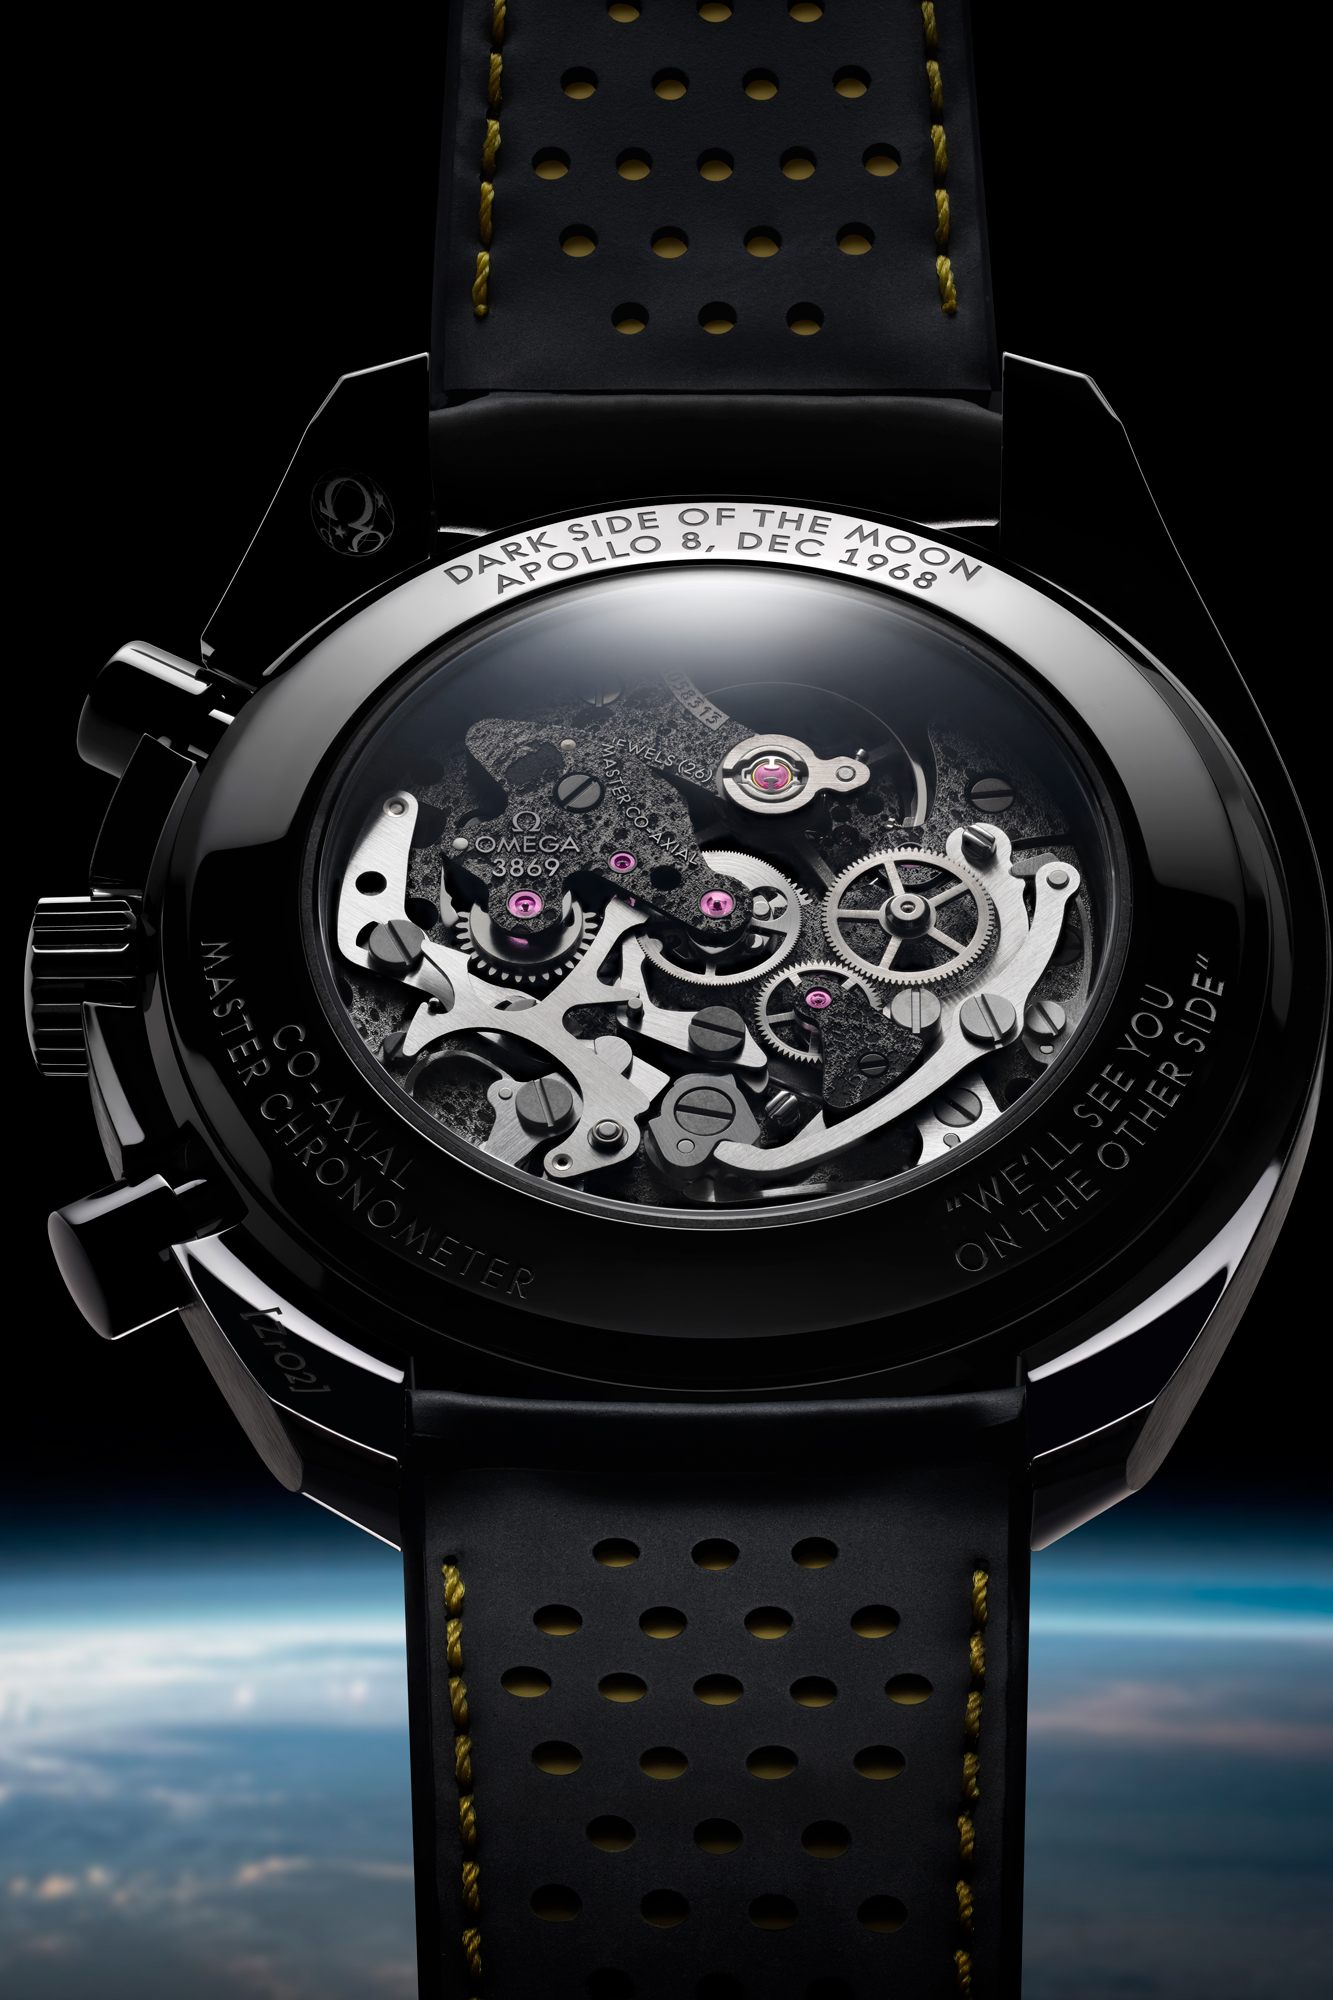 The Omega 3869 movement is co-axial and Master Chronometer certified, and it features an engraving of the surface of the dark side of the moon.